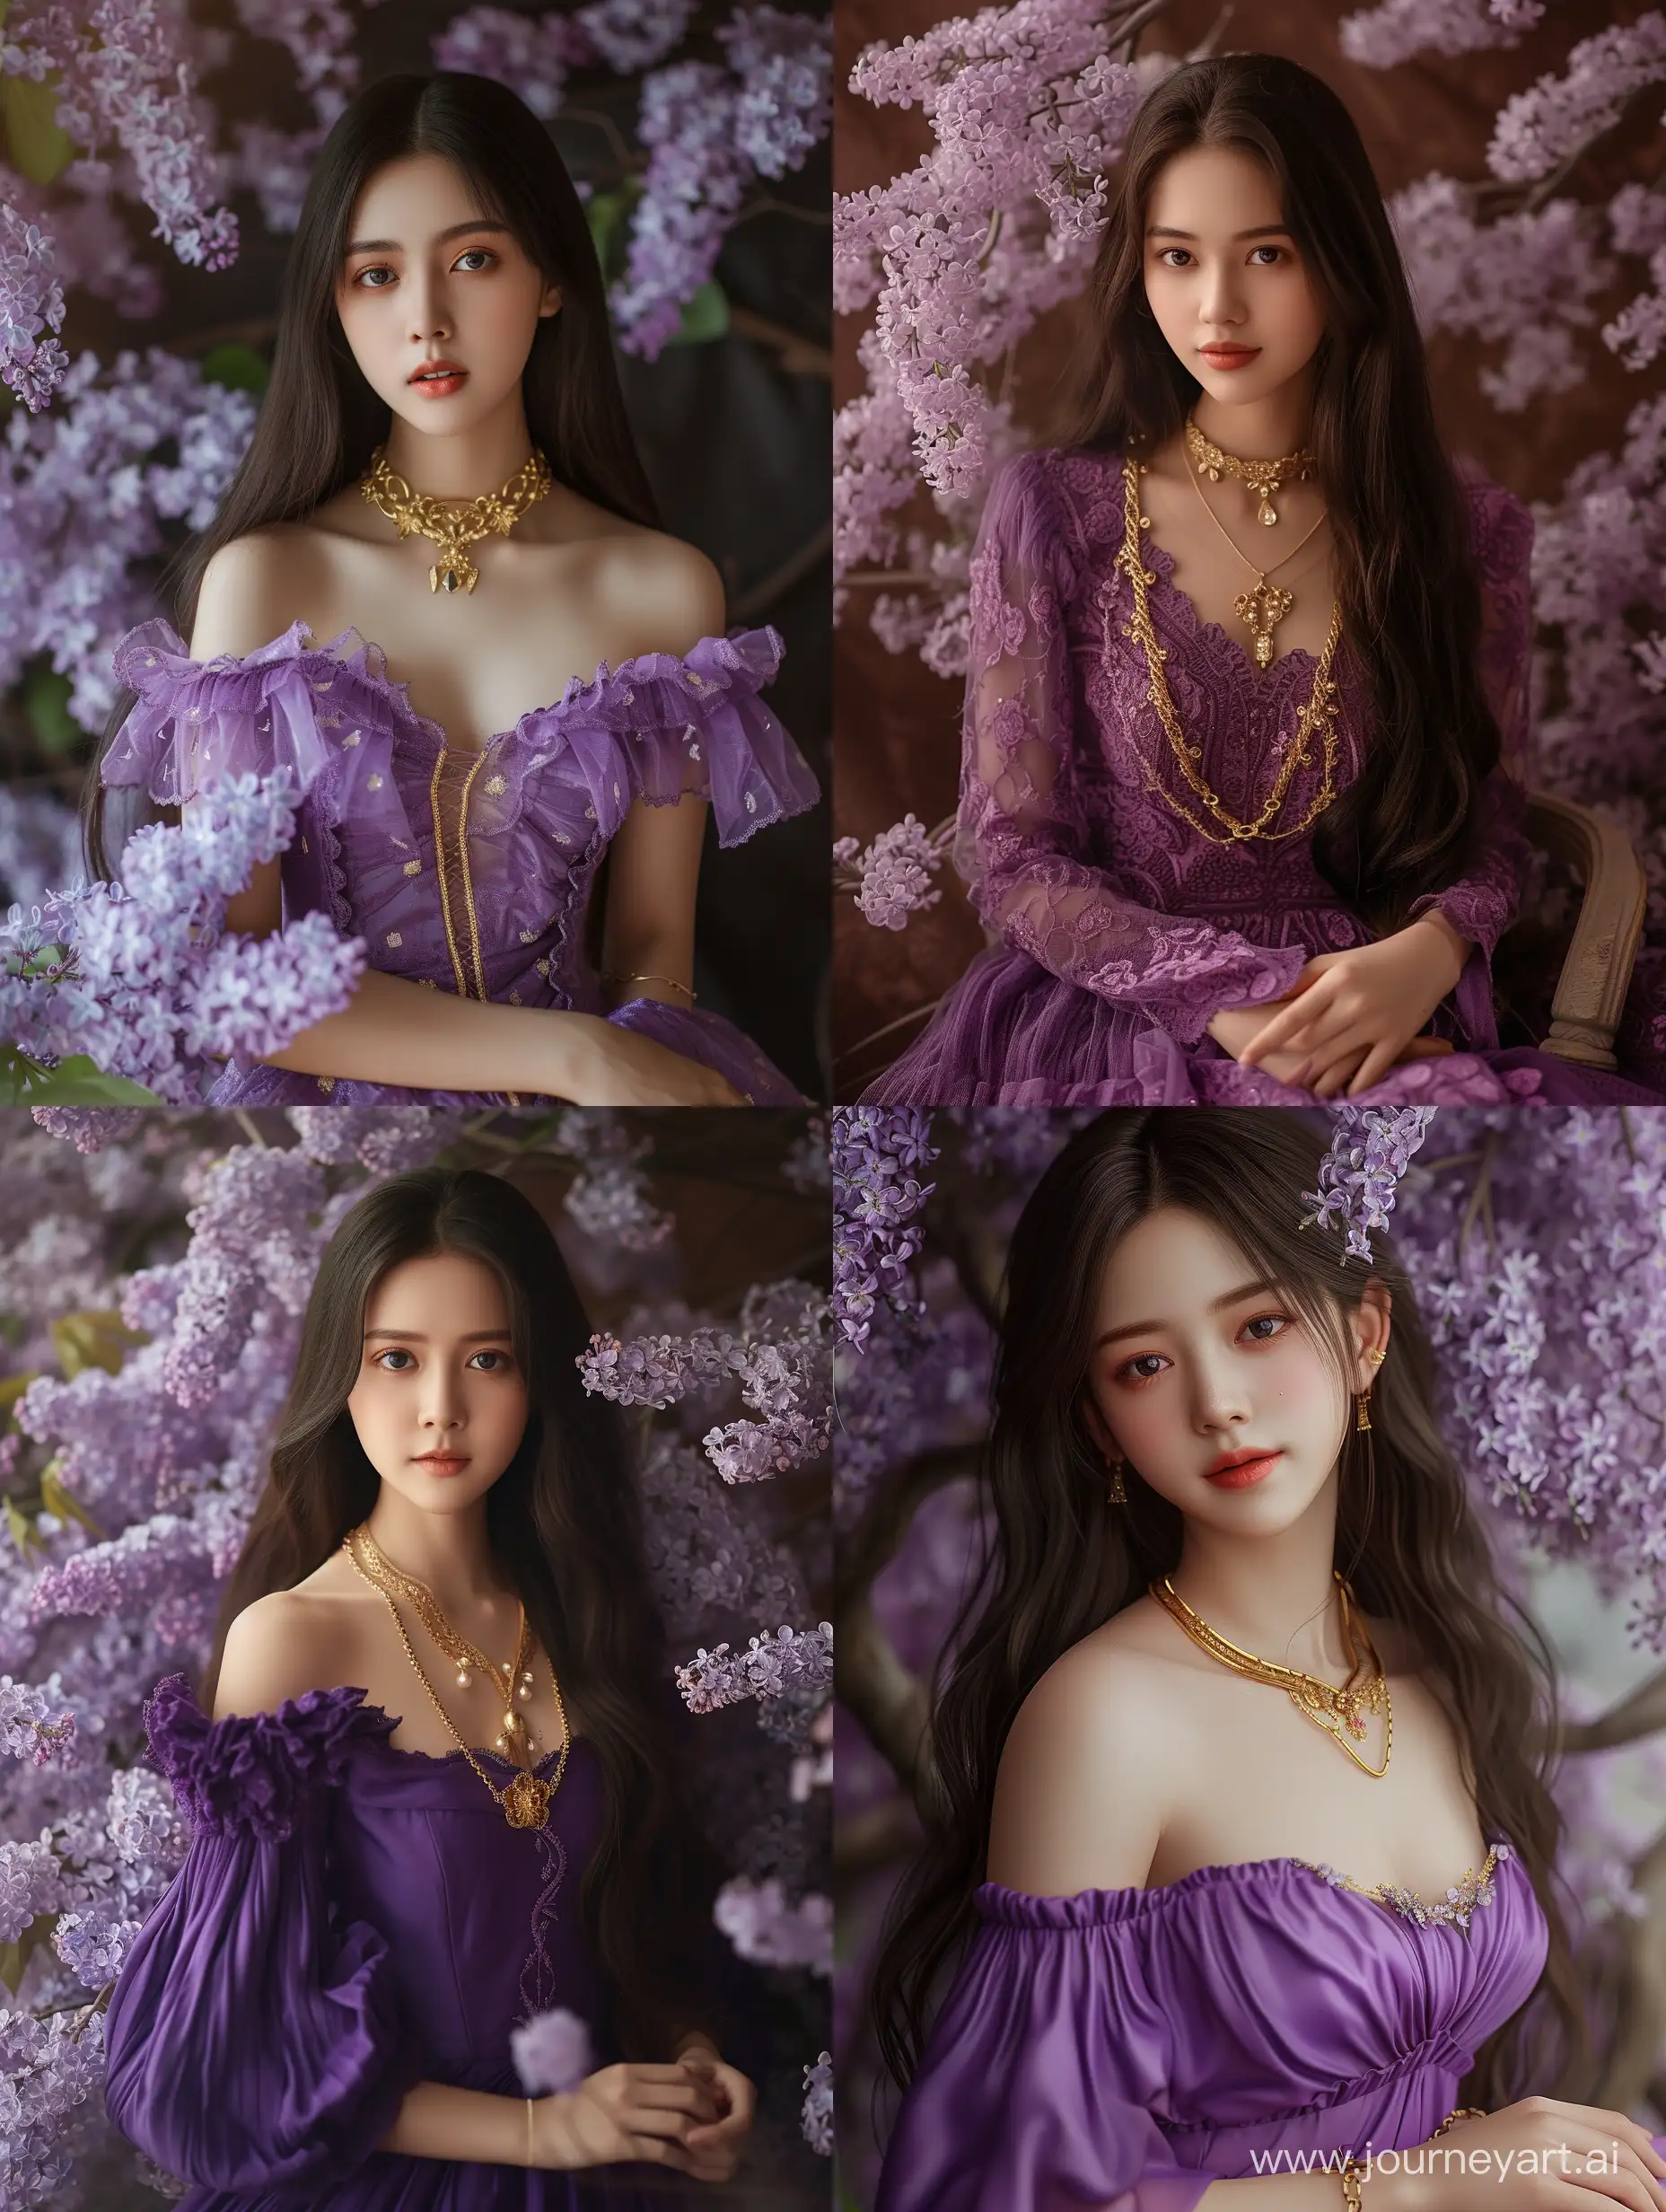 Stunning-Indonesian-Girl-in-Purple-Dress-with-Gold-Necklace-and-Lilac-Flowers